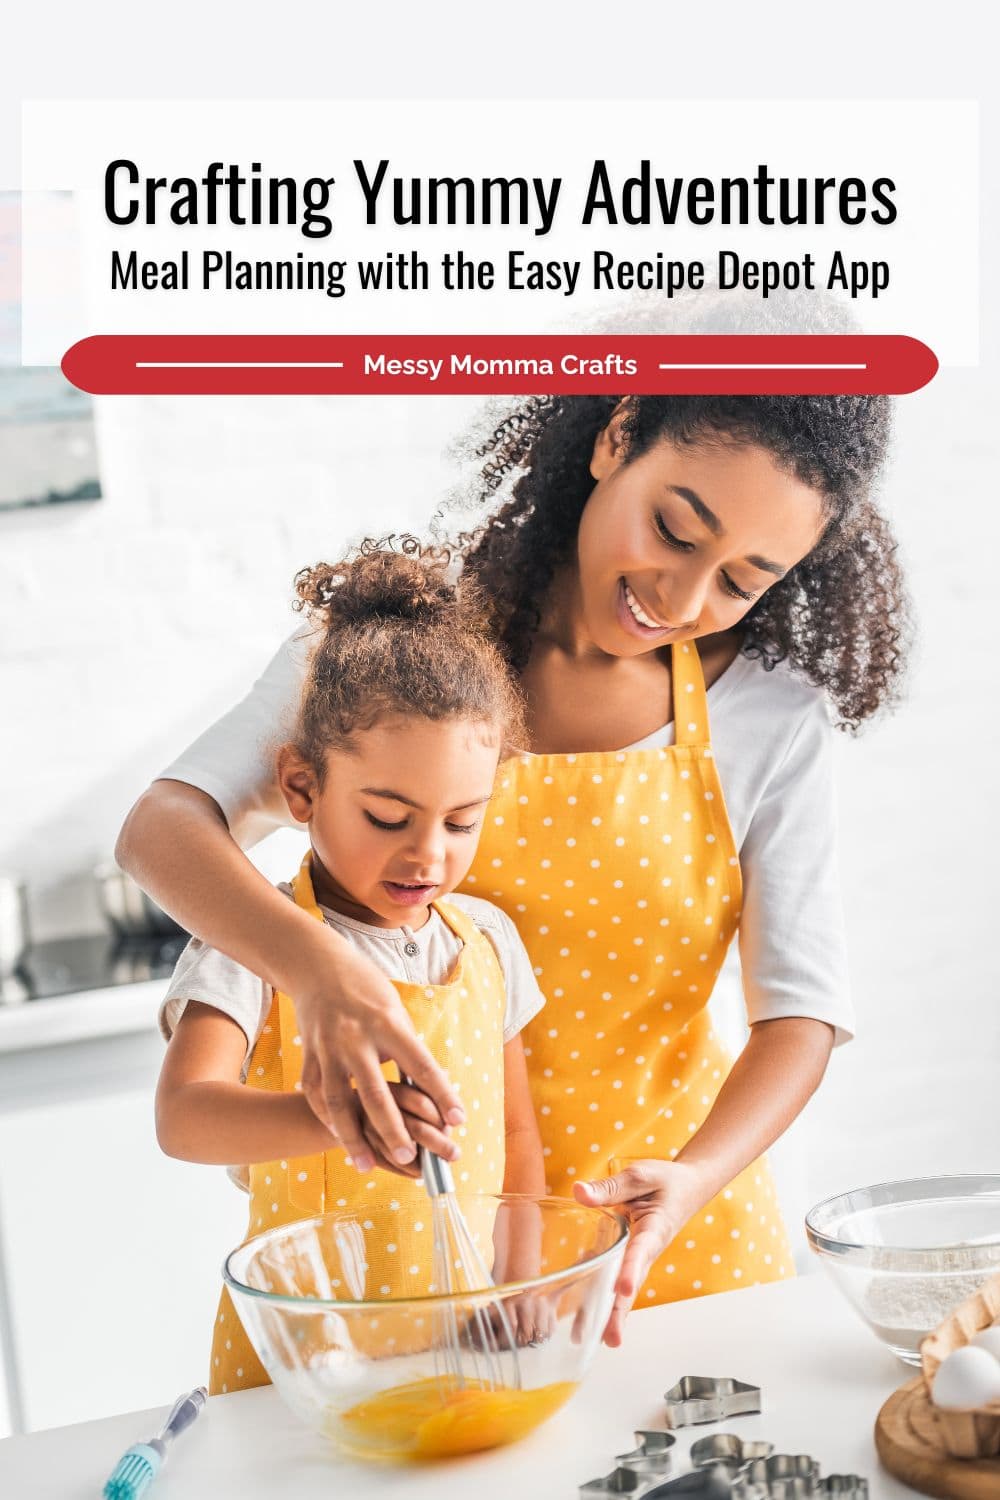 Crafting yummy adventures: meal planning with the Easy Recipe Depot app.